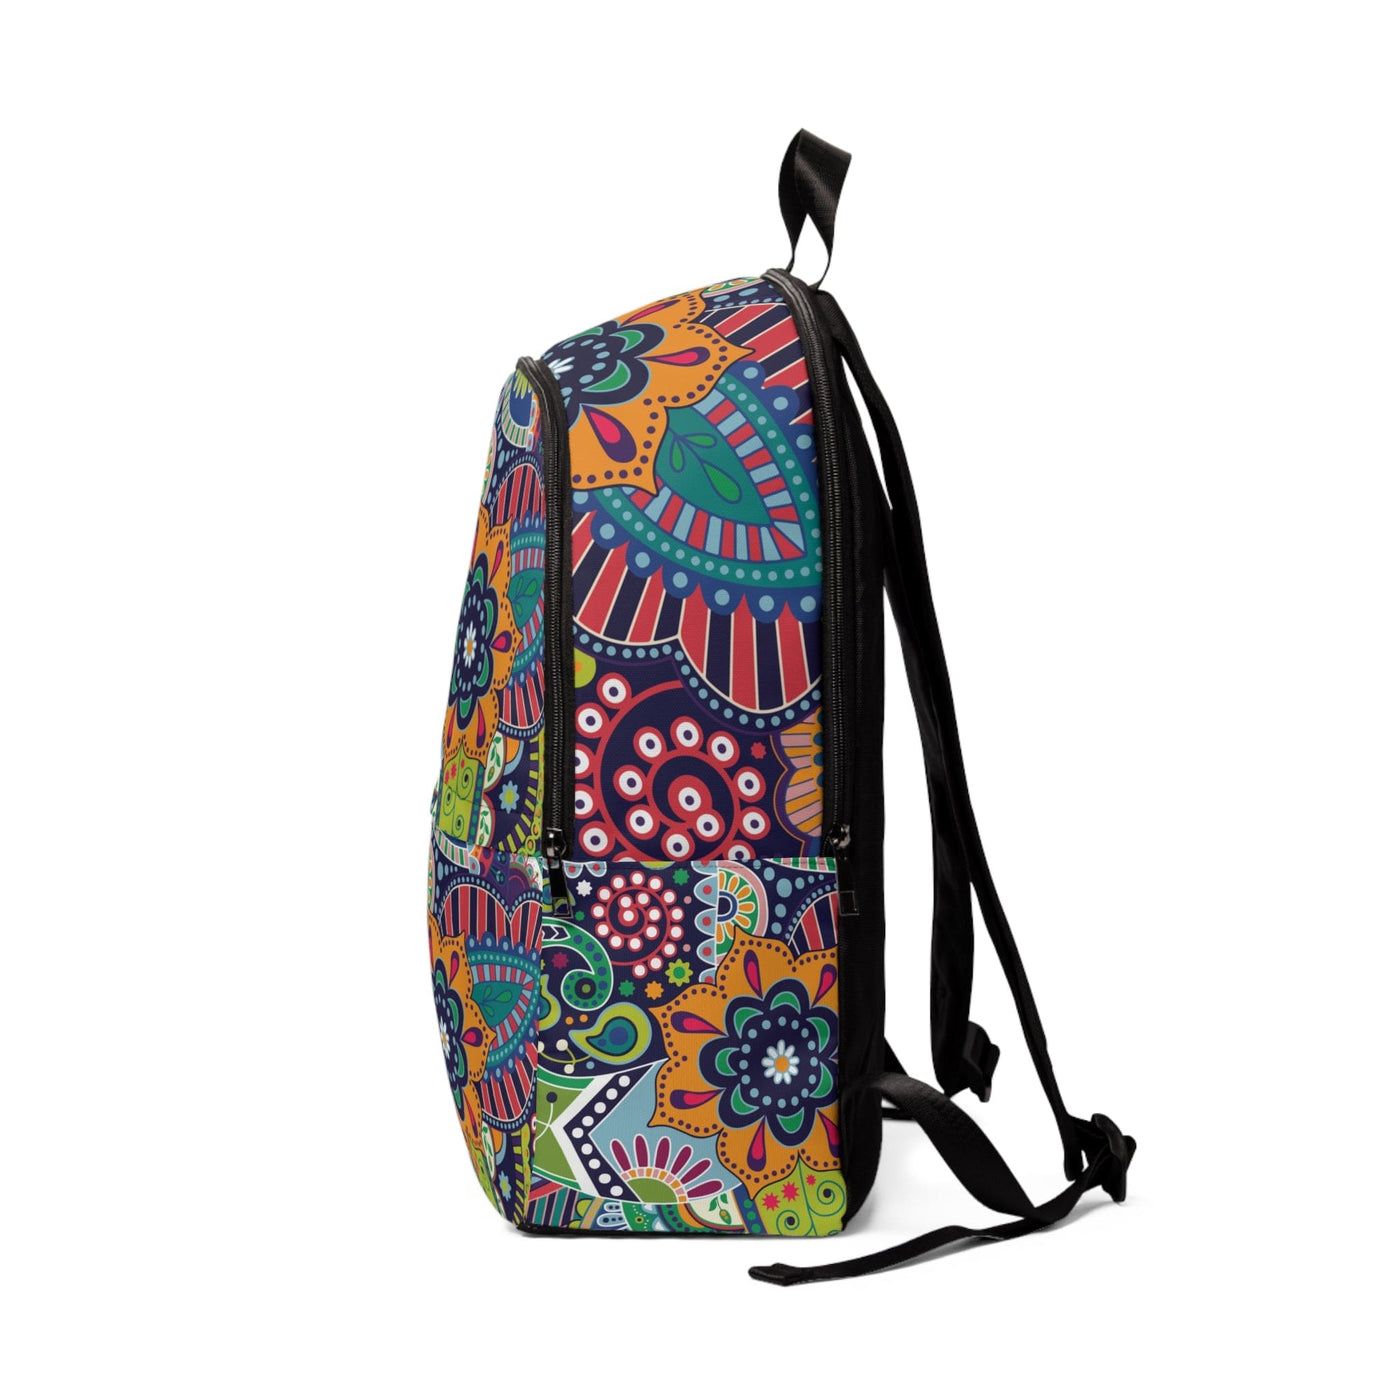 Fashion Backpack Waterproof Floral Paisley 22523 - Bags